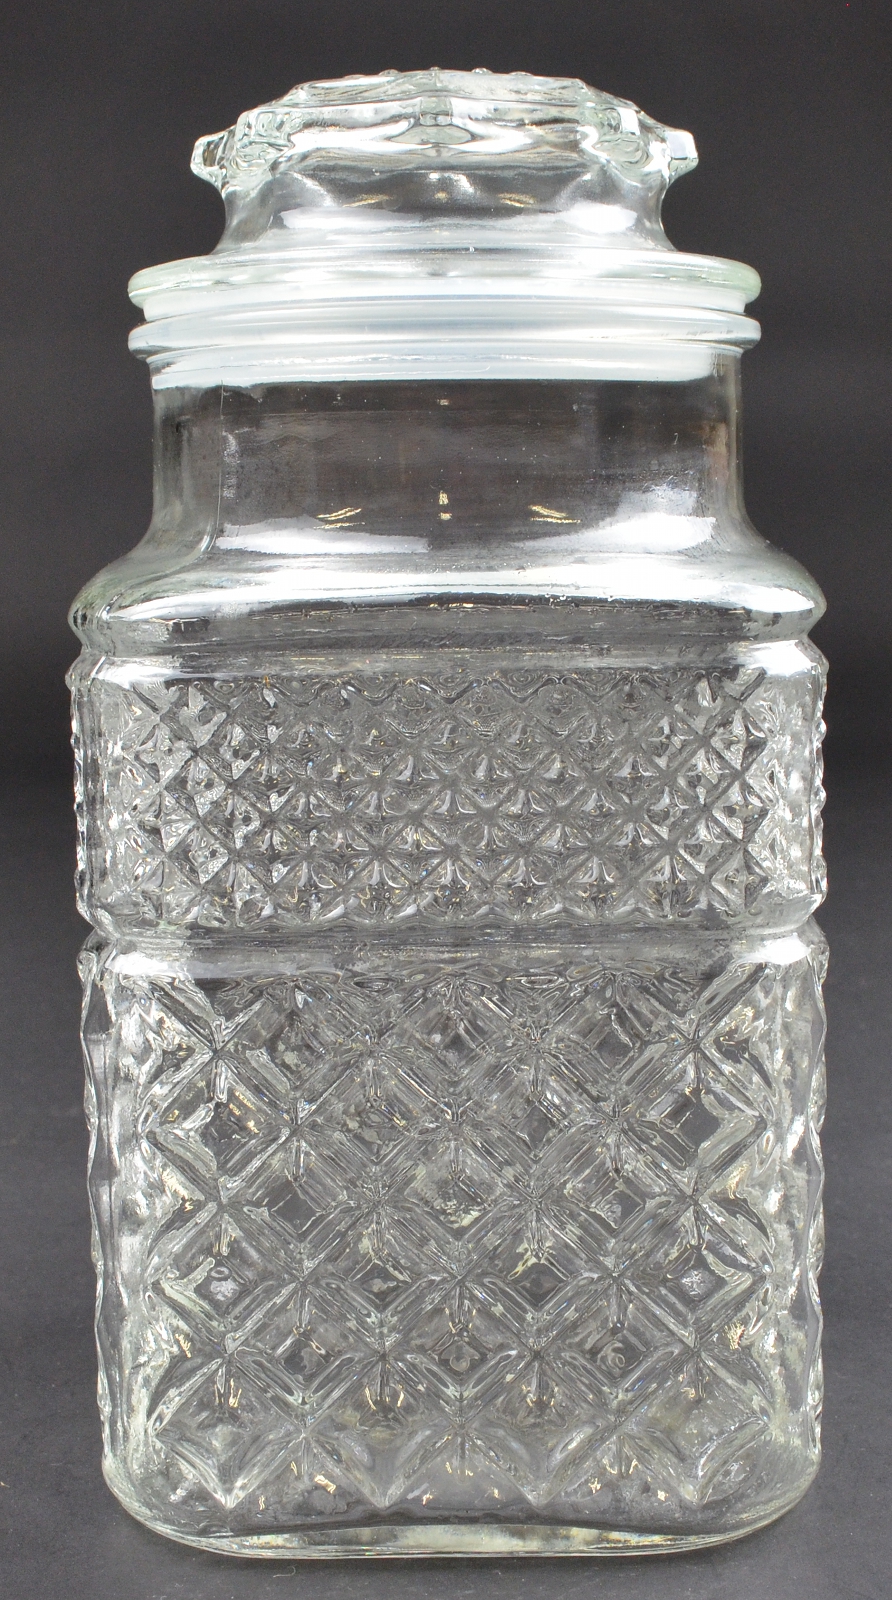 Glass Flour Canister Wexford by Anchor Hocking